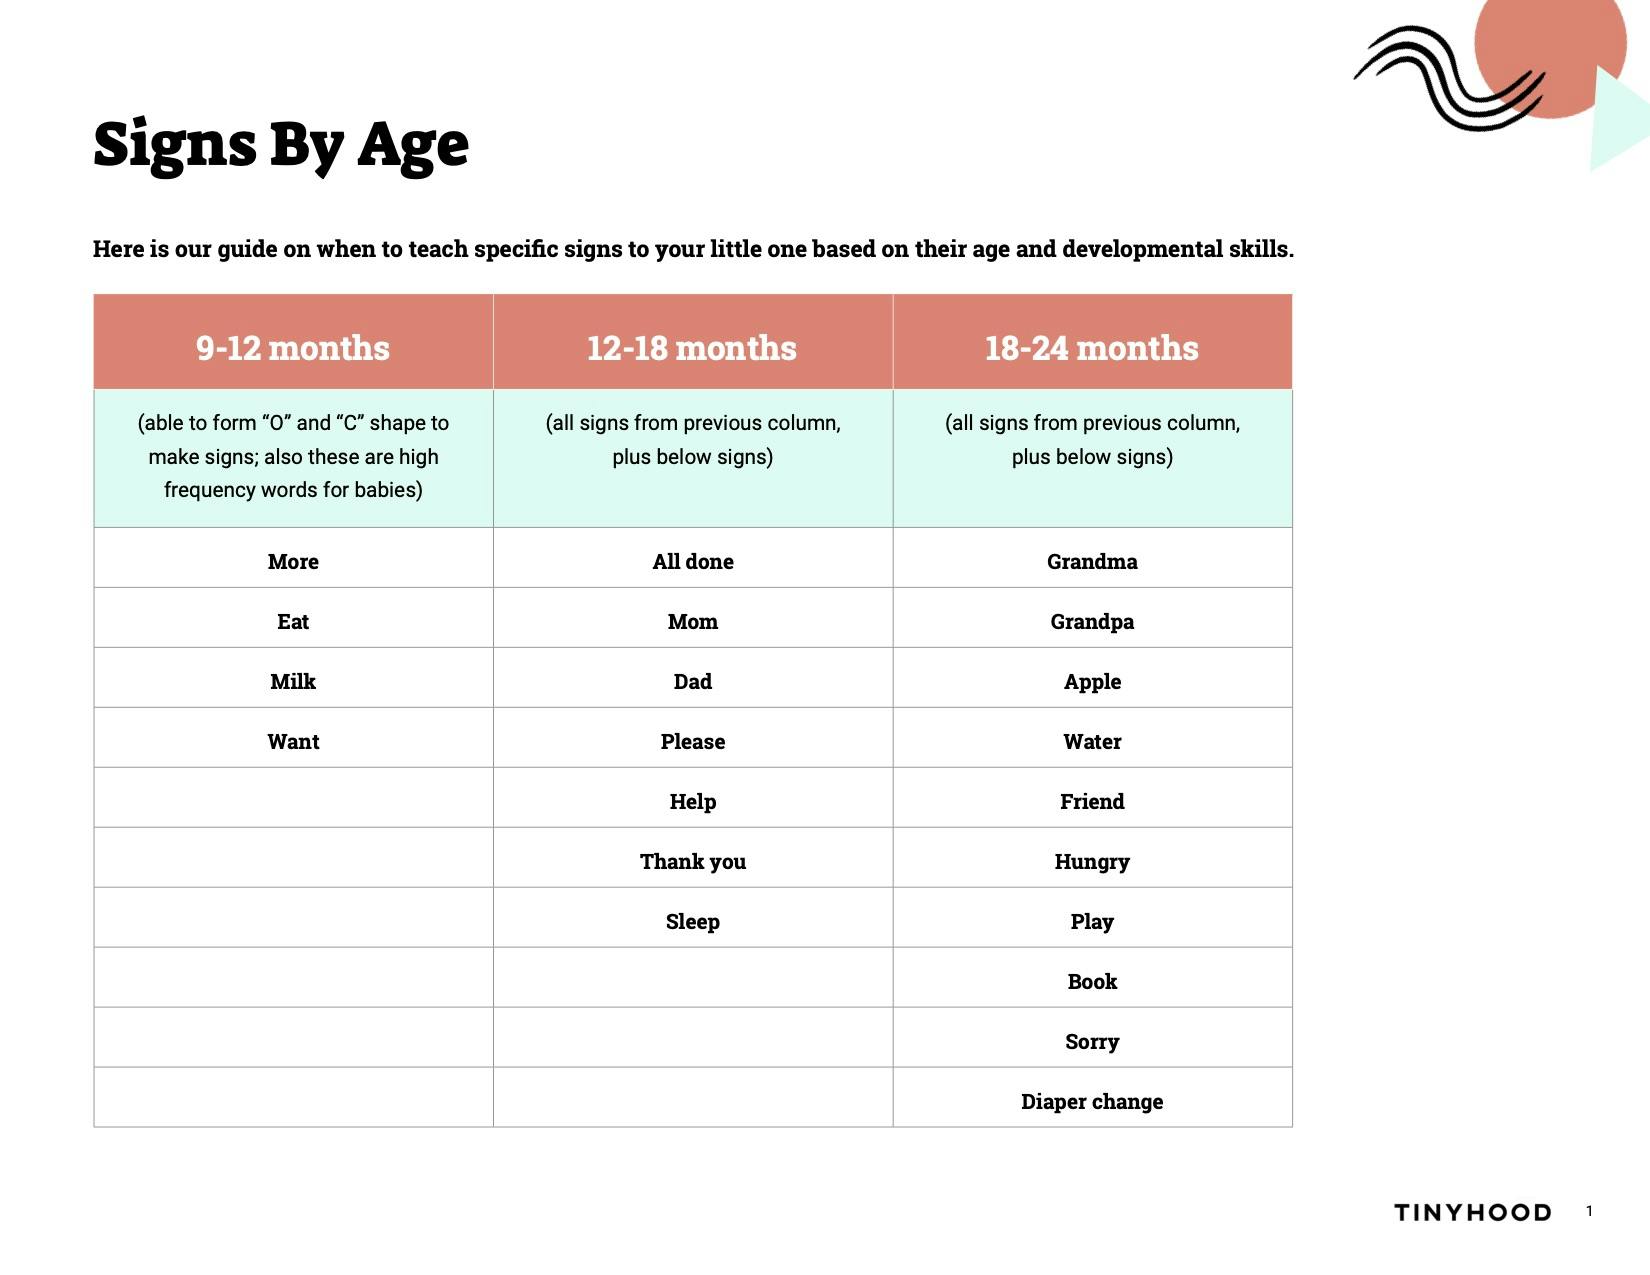 Preview image of Handout: Signs by Age